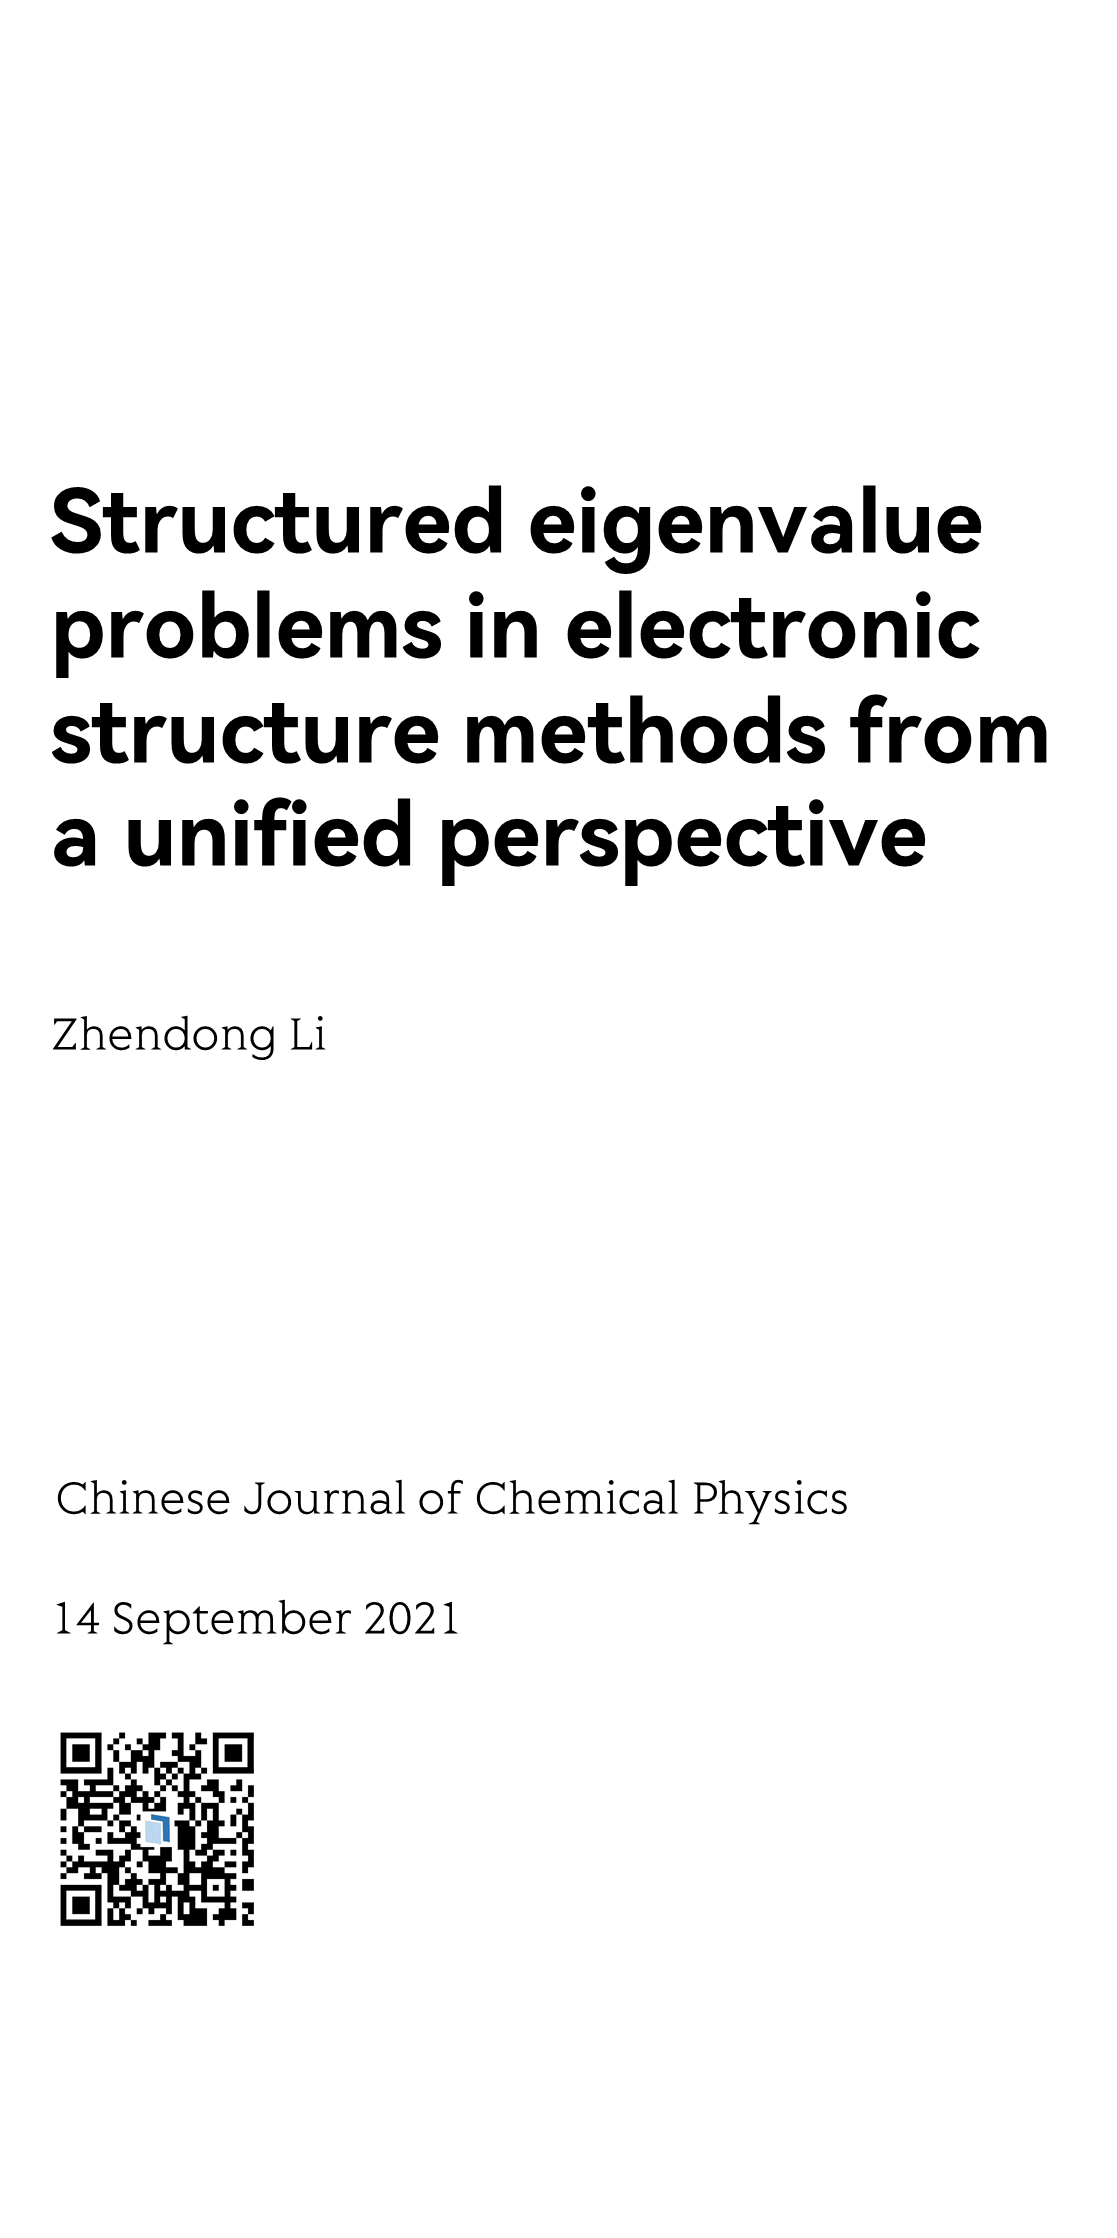 Structured eigenvalue problems in electronic structure methods from a unified perspective_1